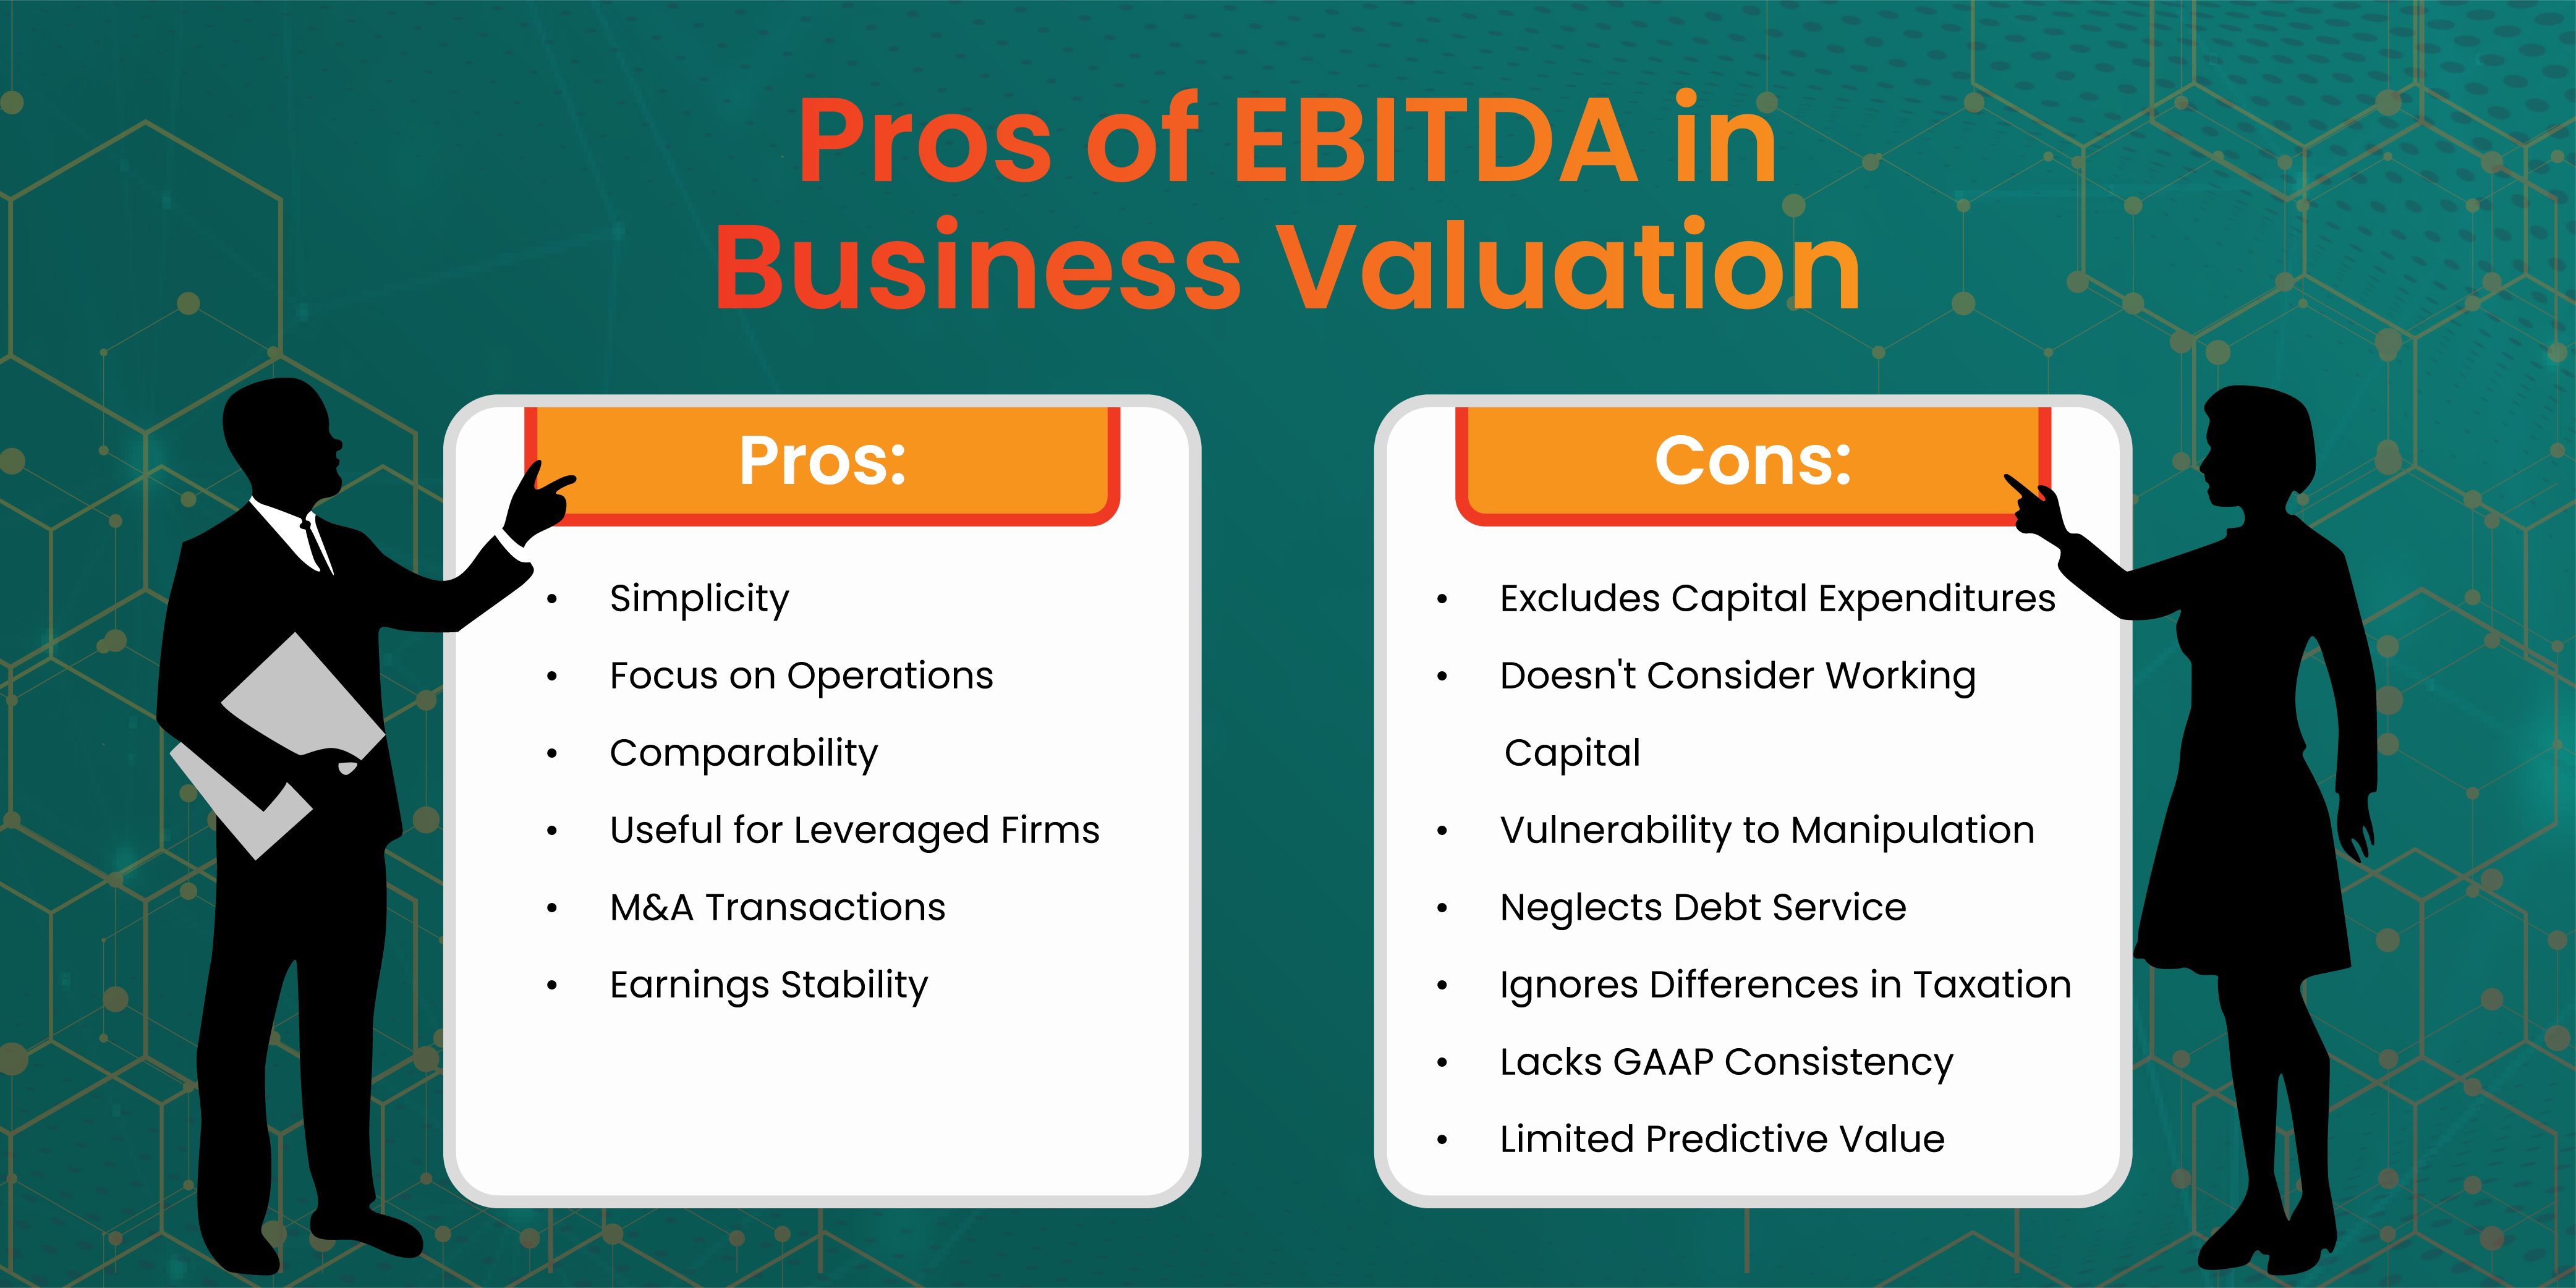 Pros and Cons of EBITDA in Business Valuation